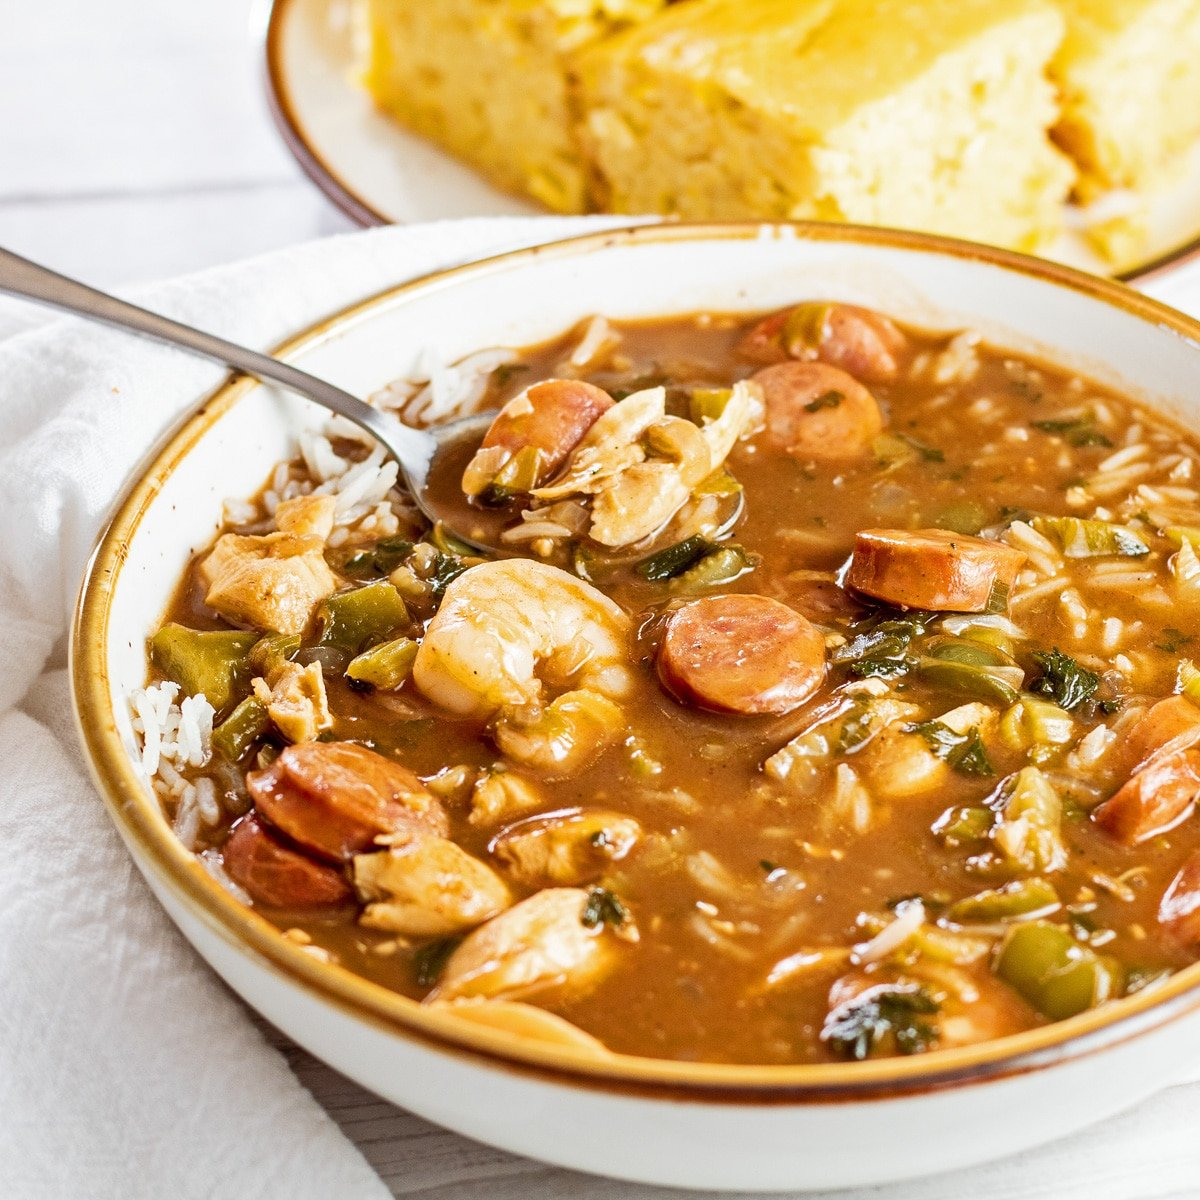 Amazingly flavorful gumbo soup combines the classic flavor of Creole gumbo with chicken, shrimp, and andouille sausage in a rich broth.